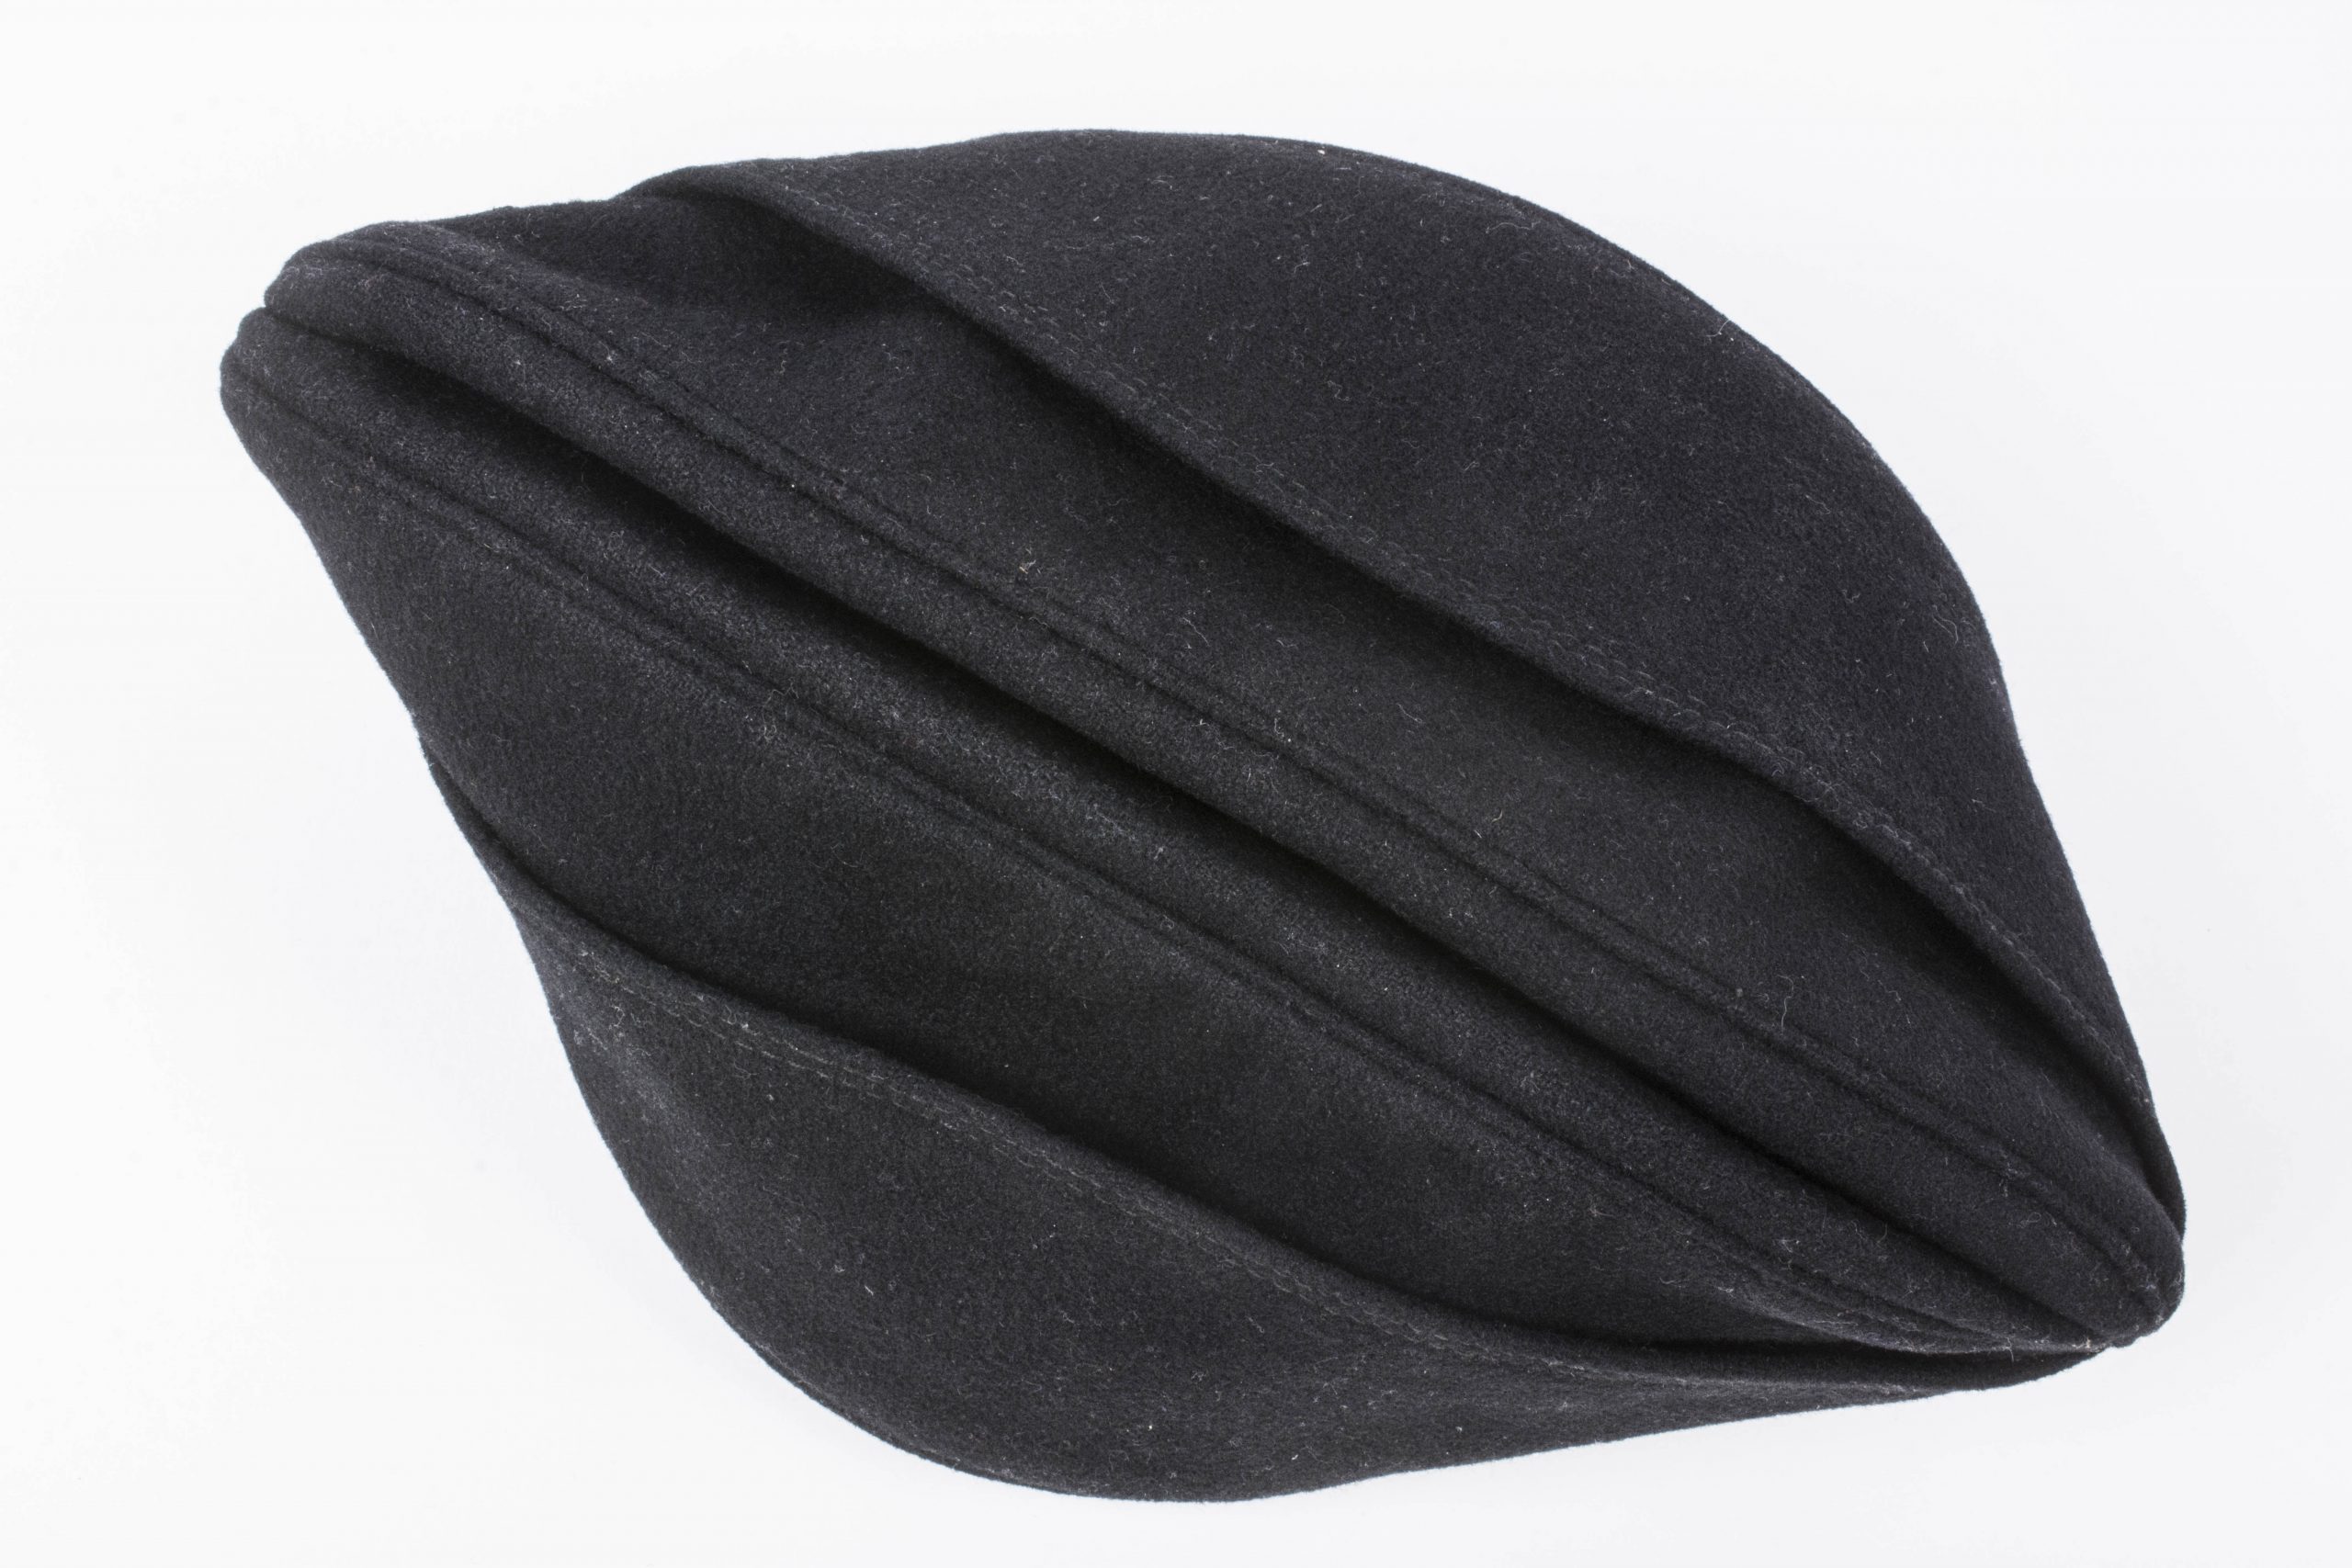 Stunning Waffen-SS Panzer sidecap with factory sewn insignia – fjm44